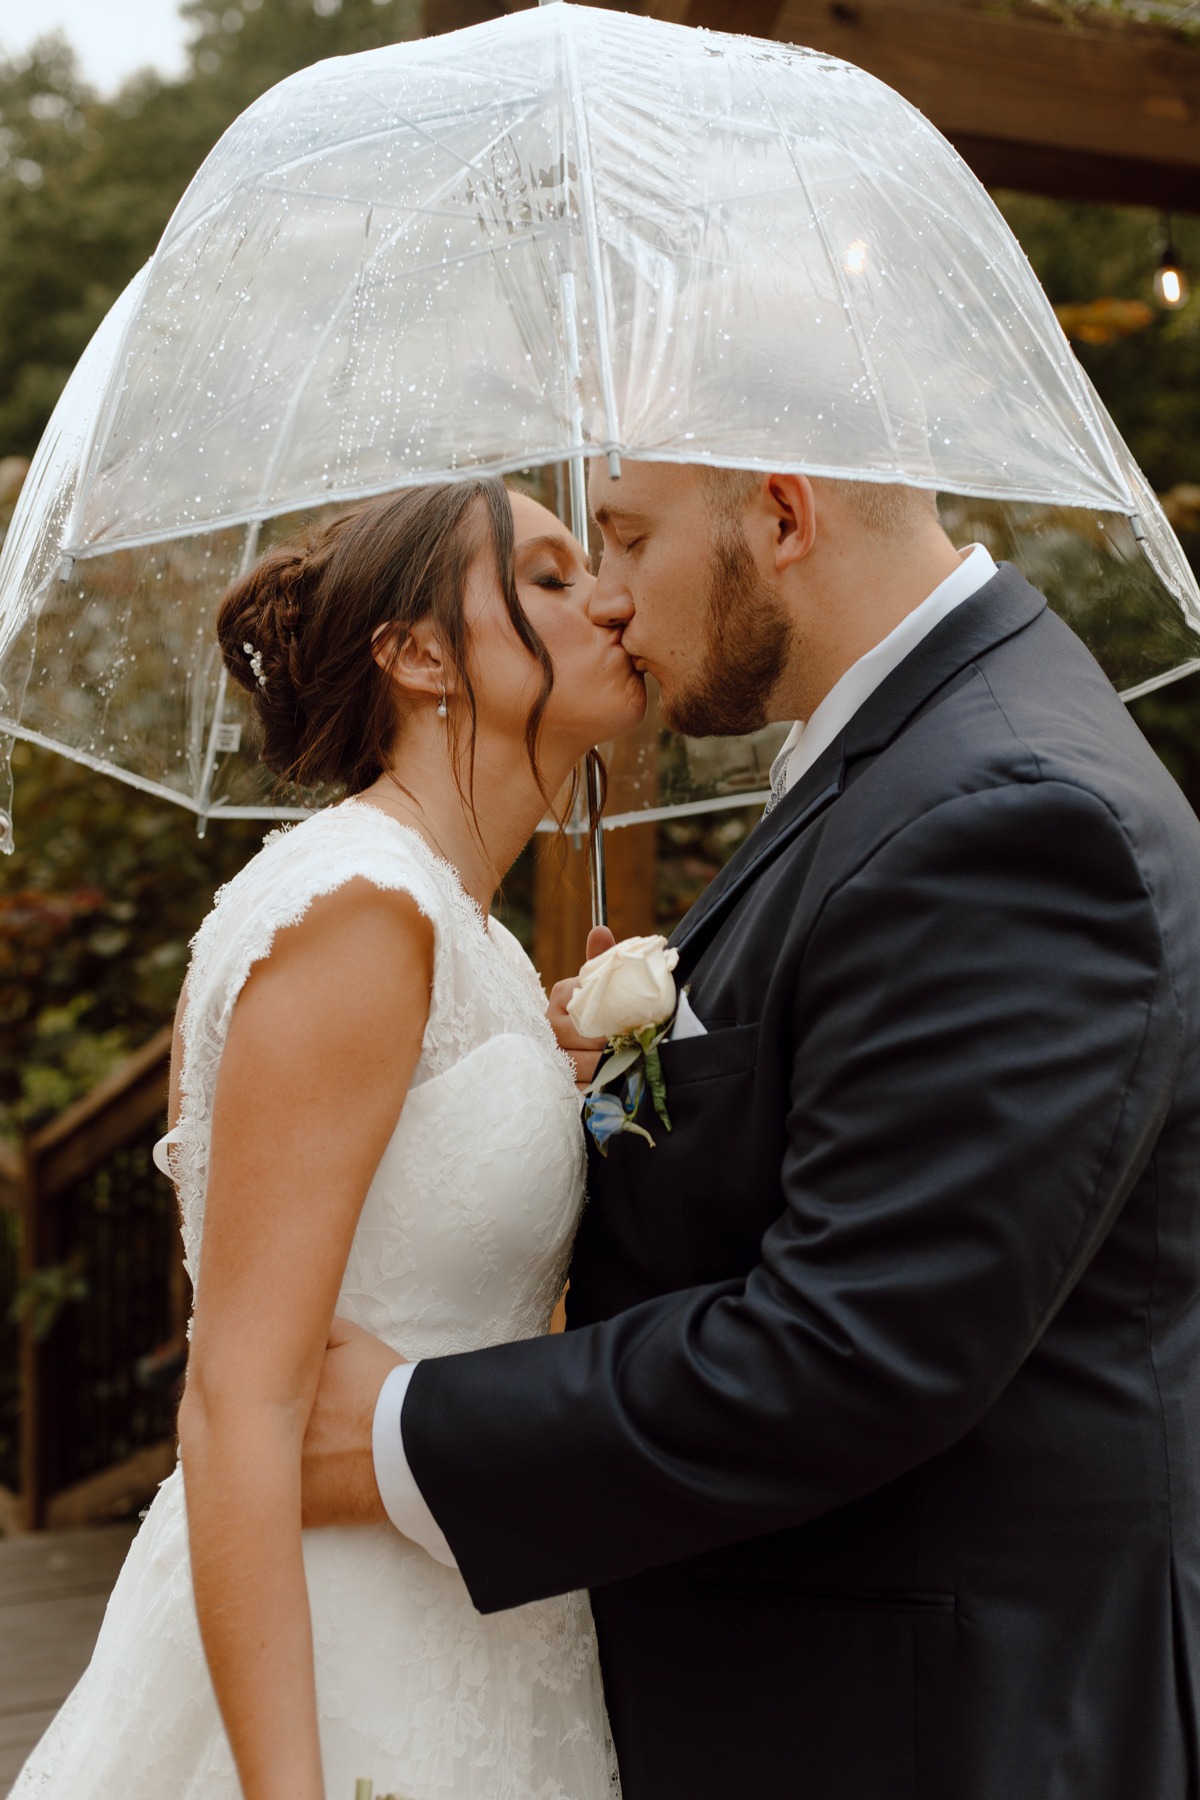 Mariah and Brad, photographed by Winchester, KY husband and wife team A Pair of Perry's Photography, share a romantic kiss under a clear umbrella during their September fall wedding at the picturesque Valley Oaks Wedding Barn in Jeffersonville, Kentucky.